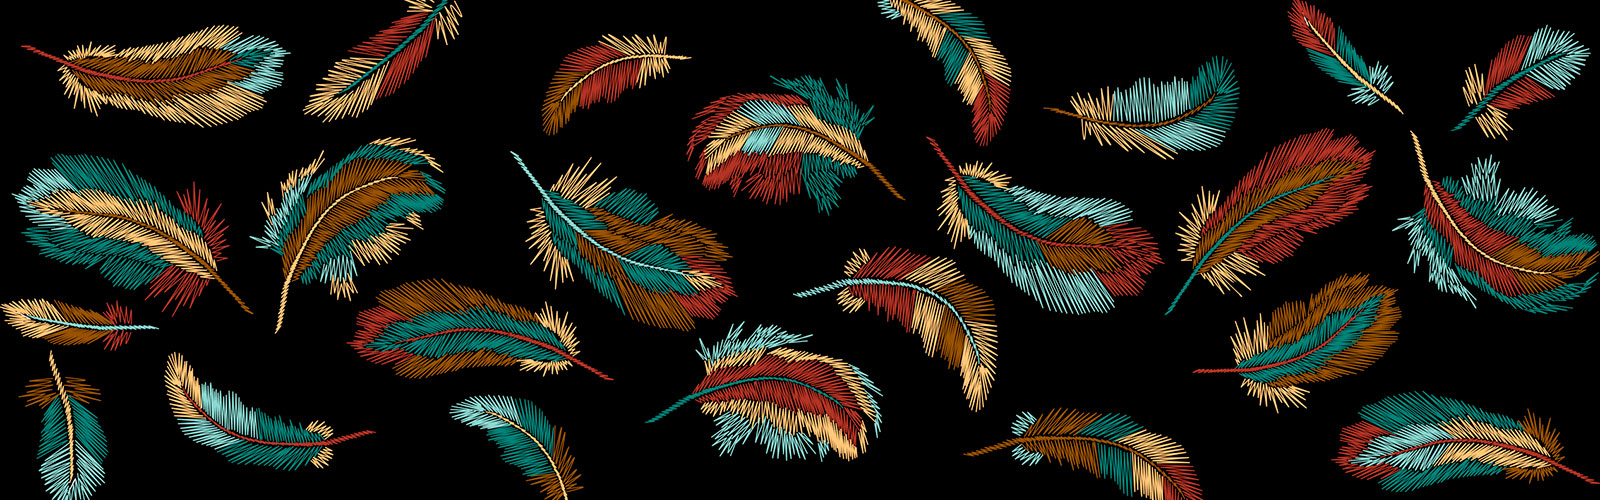 multicolored feathers on a black background